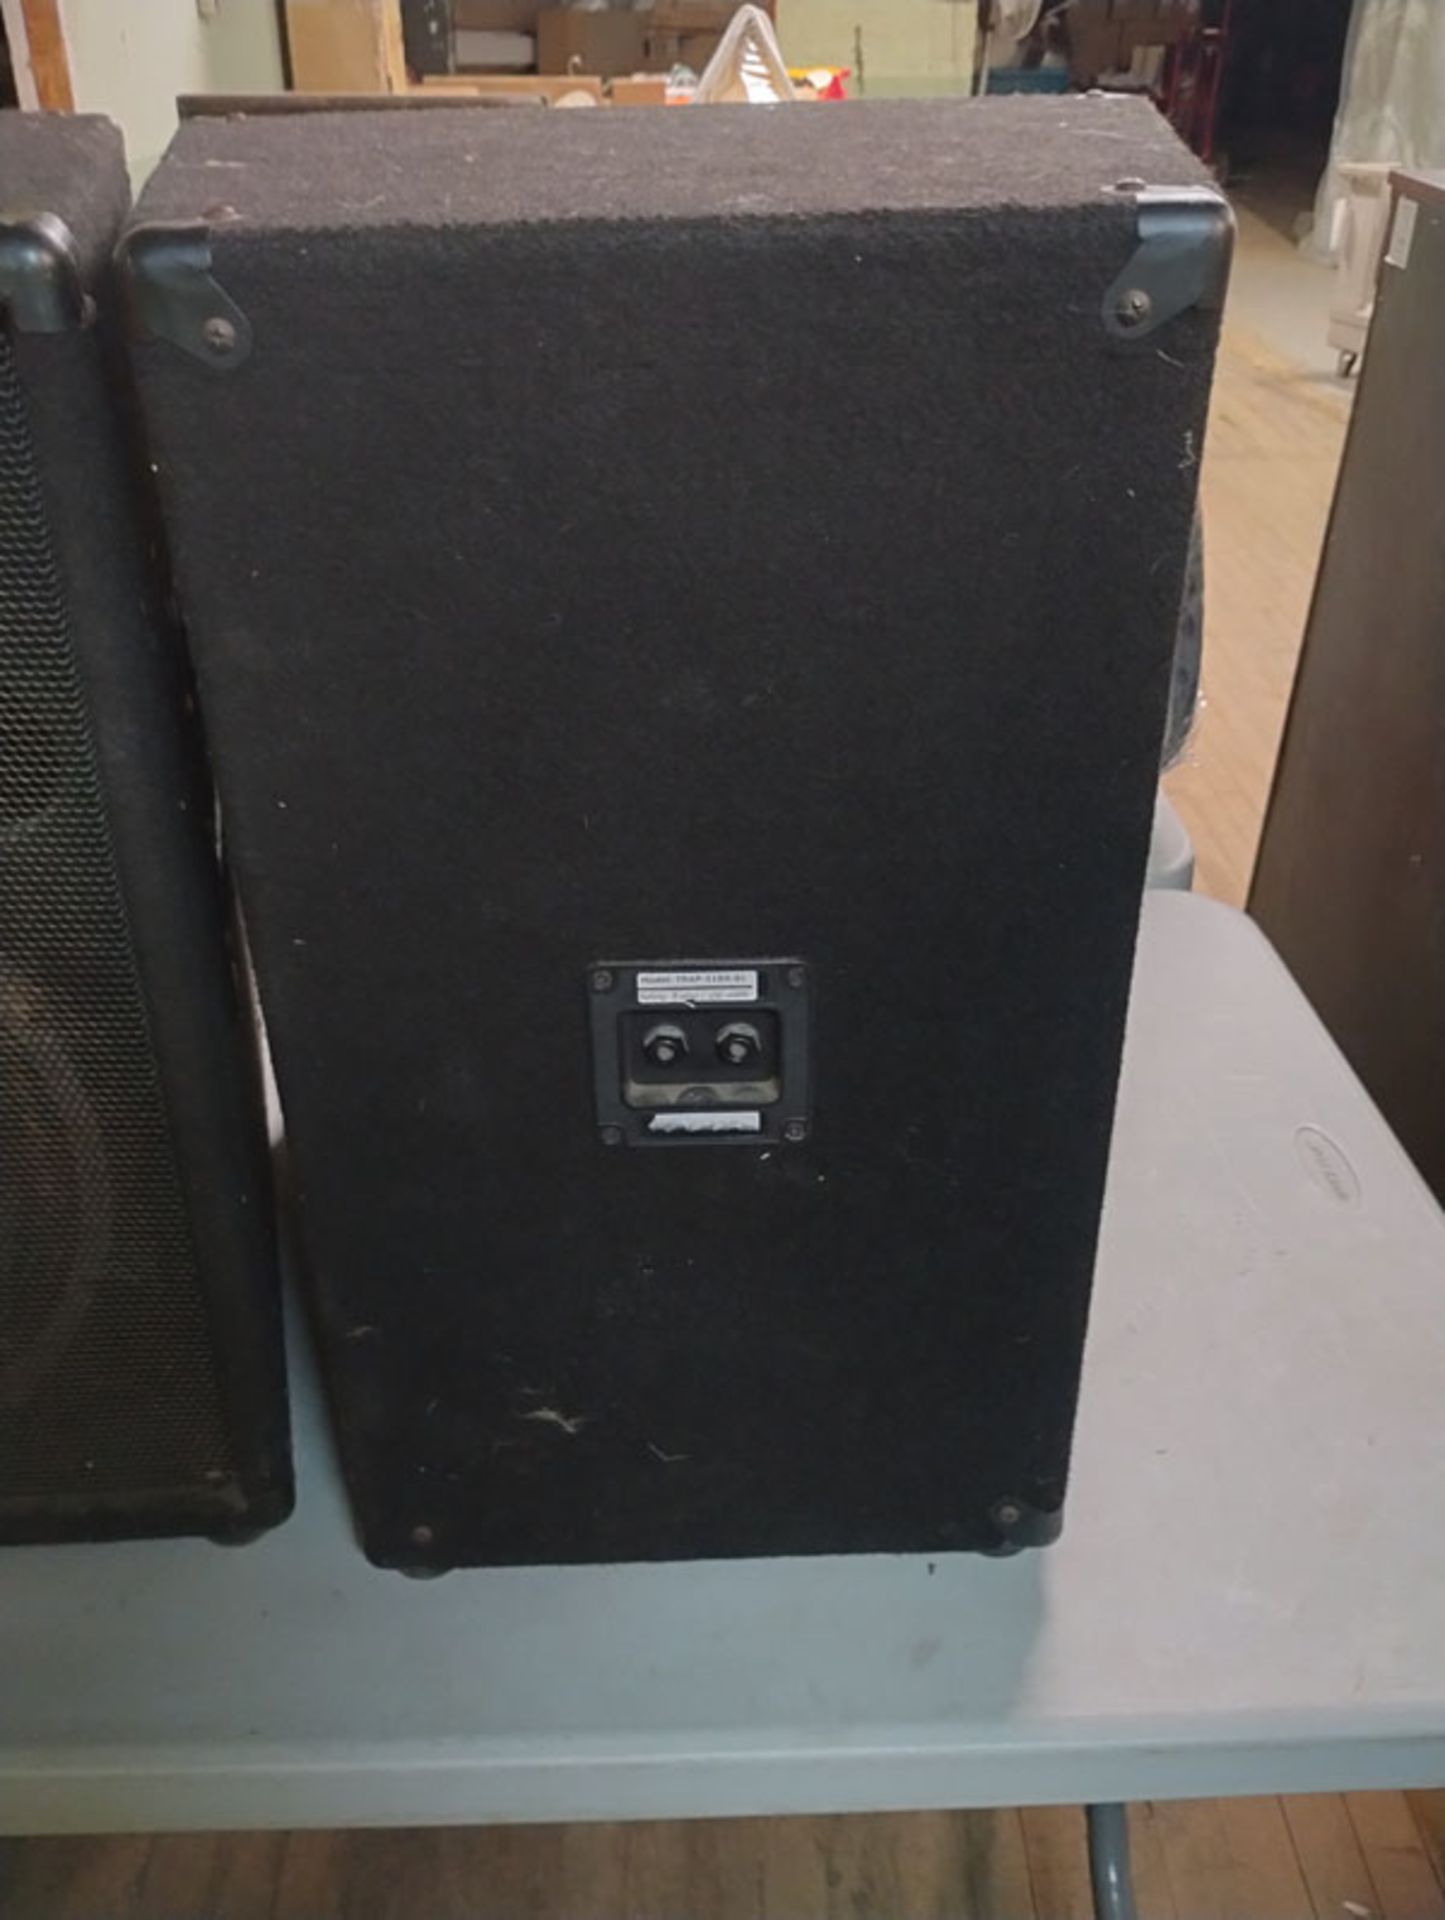 SET OF (2) 15" SPEAKERS - MODEL TRAP-115H-S1 , 250W (This lot of located at the Grossman warehouse - Image 6 of 8